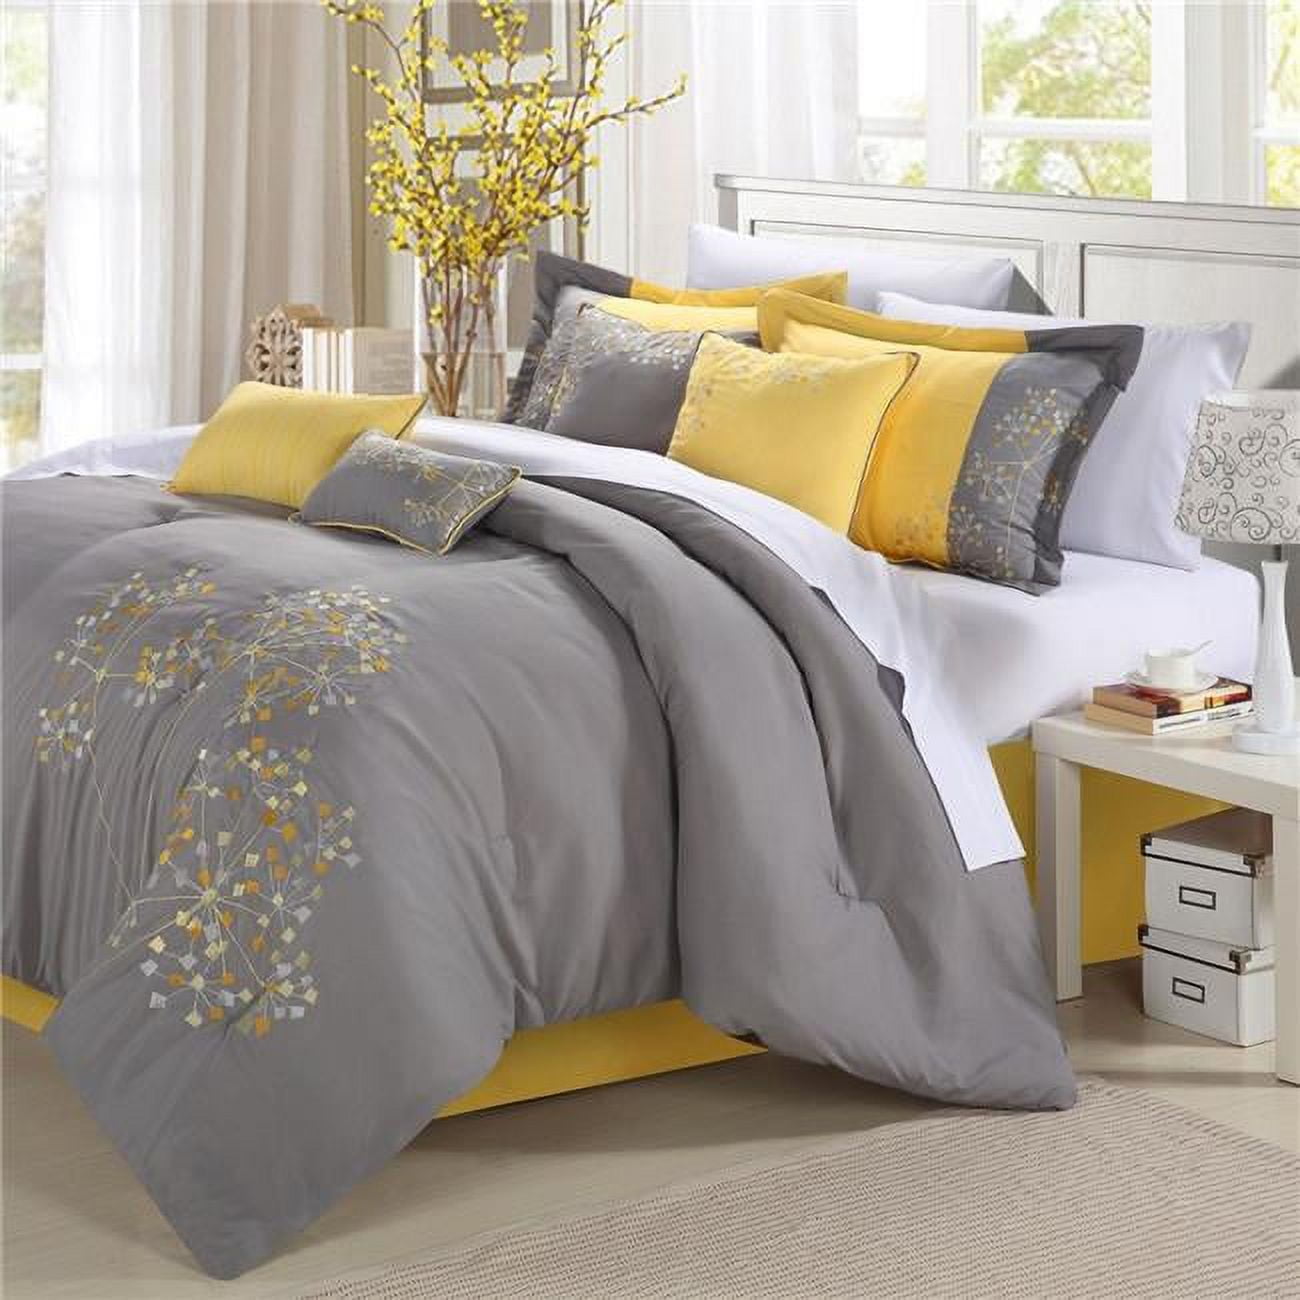 33cq111-us Pink Floral Embroidered Comforter Set - Yellow - Queen - 8 Piece